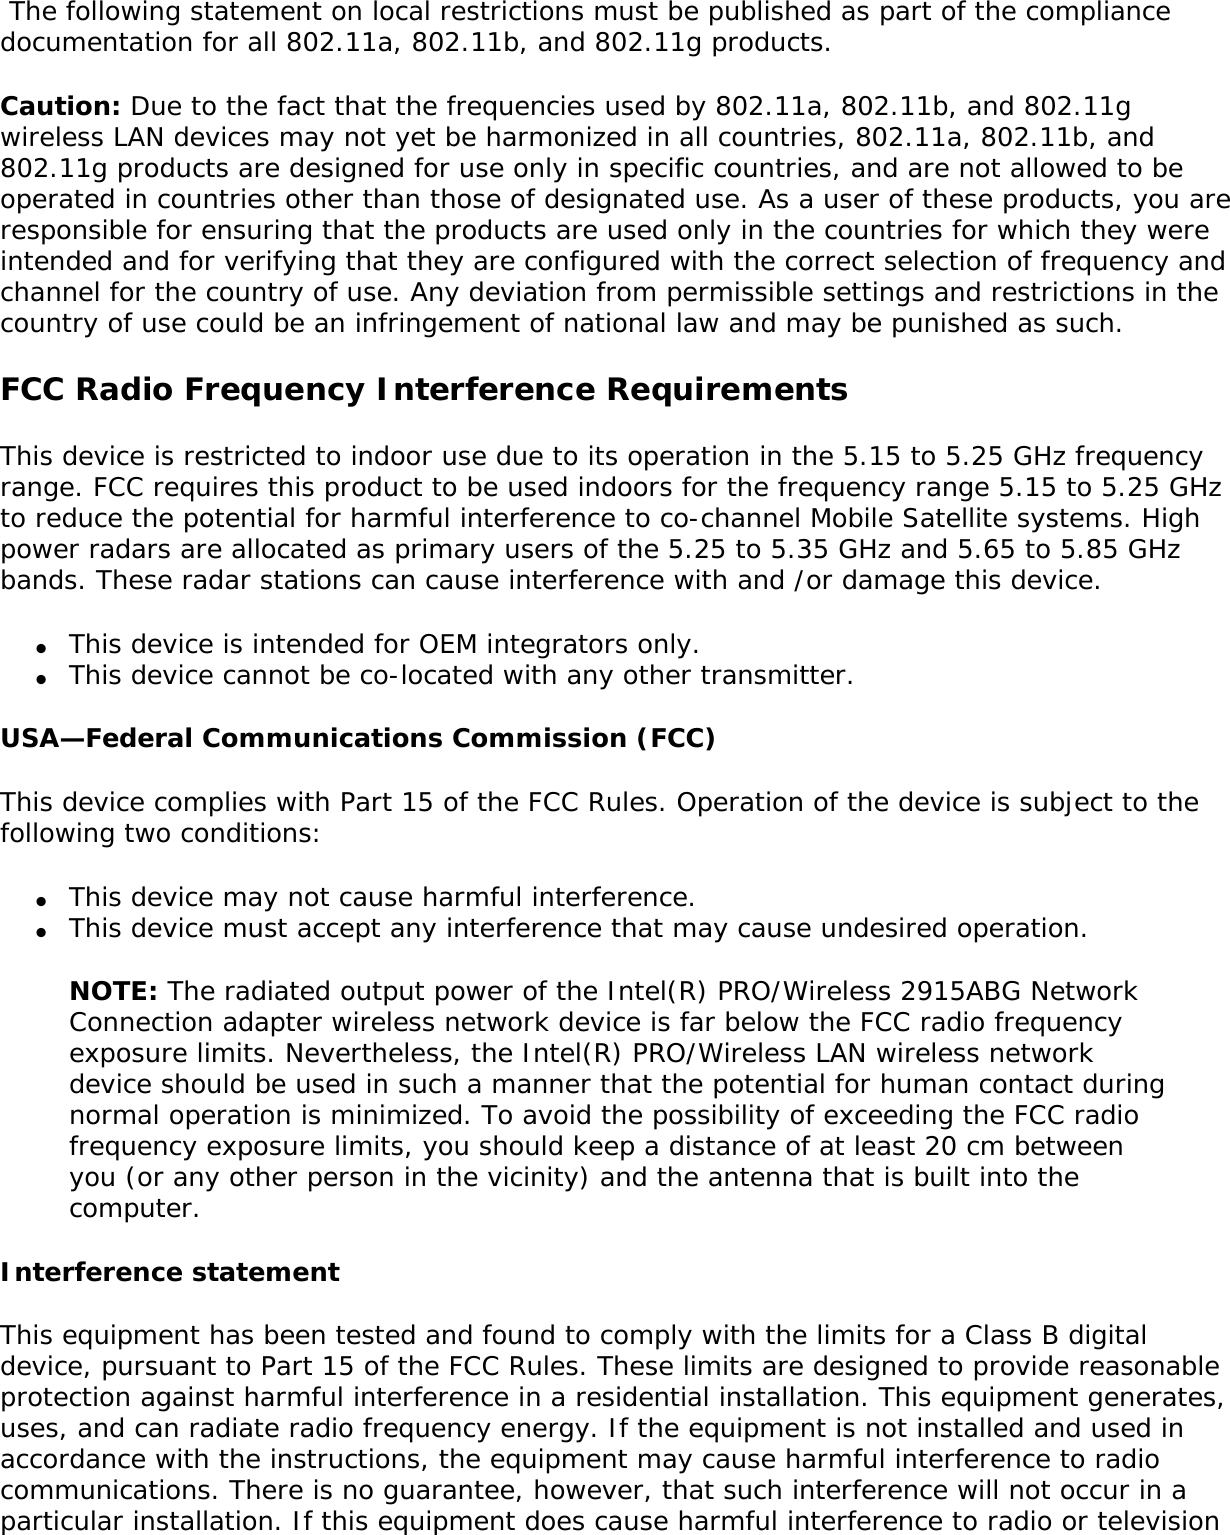 following: ●     Using the Intel(R) PRO/Wireless 2915ABG Network Connection adapter equipment on board airplanes, or ●     Using the Intel(R) PRO/Wireless 2915ABG Network Connection adapter equipment in any other environment where the risk of interference with other devices or services is perceived or identified as being harmfulIf you are uncertain of the policy that applies to the use of wireless devices in a specific organization or environment (an airport, for example), you are encouraged to ask for authorization to use the Intel(R) PRO/Wireless 2915ABG Network Connection adapter wireless device before you turn it on. Regulatory informationInformation for the OEMs and Integrators:  The following statement must be included with all versions of this document supplied to an OEM or integrator, but should not be distributed to the end user. ●     This device is intended for OEM integrators only. ●     This device cannot be co-located with any other transmitter.●     Please refer to the full Grant of Equipment document for other restrictions.●     This device must be operated and used with a locally approved access point.Information To Be Supplied to the End User by the OEM or Integrator The following regulatory and safety notices must be published in documentation supplied to the end user of the product or system incorporating an Intel(R) PRO/Wireless 2915ABG Network Connection in compliance with local regulations.  Host system must be labeled with &quot;Contains FCC ID: XXXXXXXX&quot;, FCC ID displayed on label. The Intel(R) PRO/Wireless 2915ABG Network Connection adapter wireless network device must be installed and used in strict accordance with the manufacturer&apos;s instructions as described in the user documentation that comes with the product. For country-specific approvals, see Radio approvals. Intel Corporation is not responsible for any radio or television interference caused by unauthorized modification of the devices included with the Intel(R) PRO/Wireless 2915ABG Network Connection adapter kit, or the substitution or attachment of connecting cables and equipment other than that specified by Intel Corporation. The correction of interference caused by such unauthorized modification, substitution or attachment is the responsibility of the user. Intel Corporation and its authorized resellers or distributors are not liable for any damage or violation of government regulations that may arise from the user failing to comply with these guidelines. Local Restriction of 802.11a, 802.11b, and 802.11g Radio Usage 